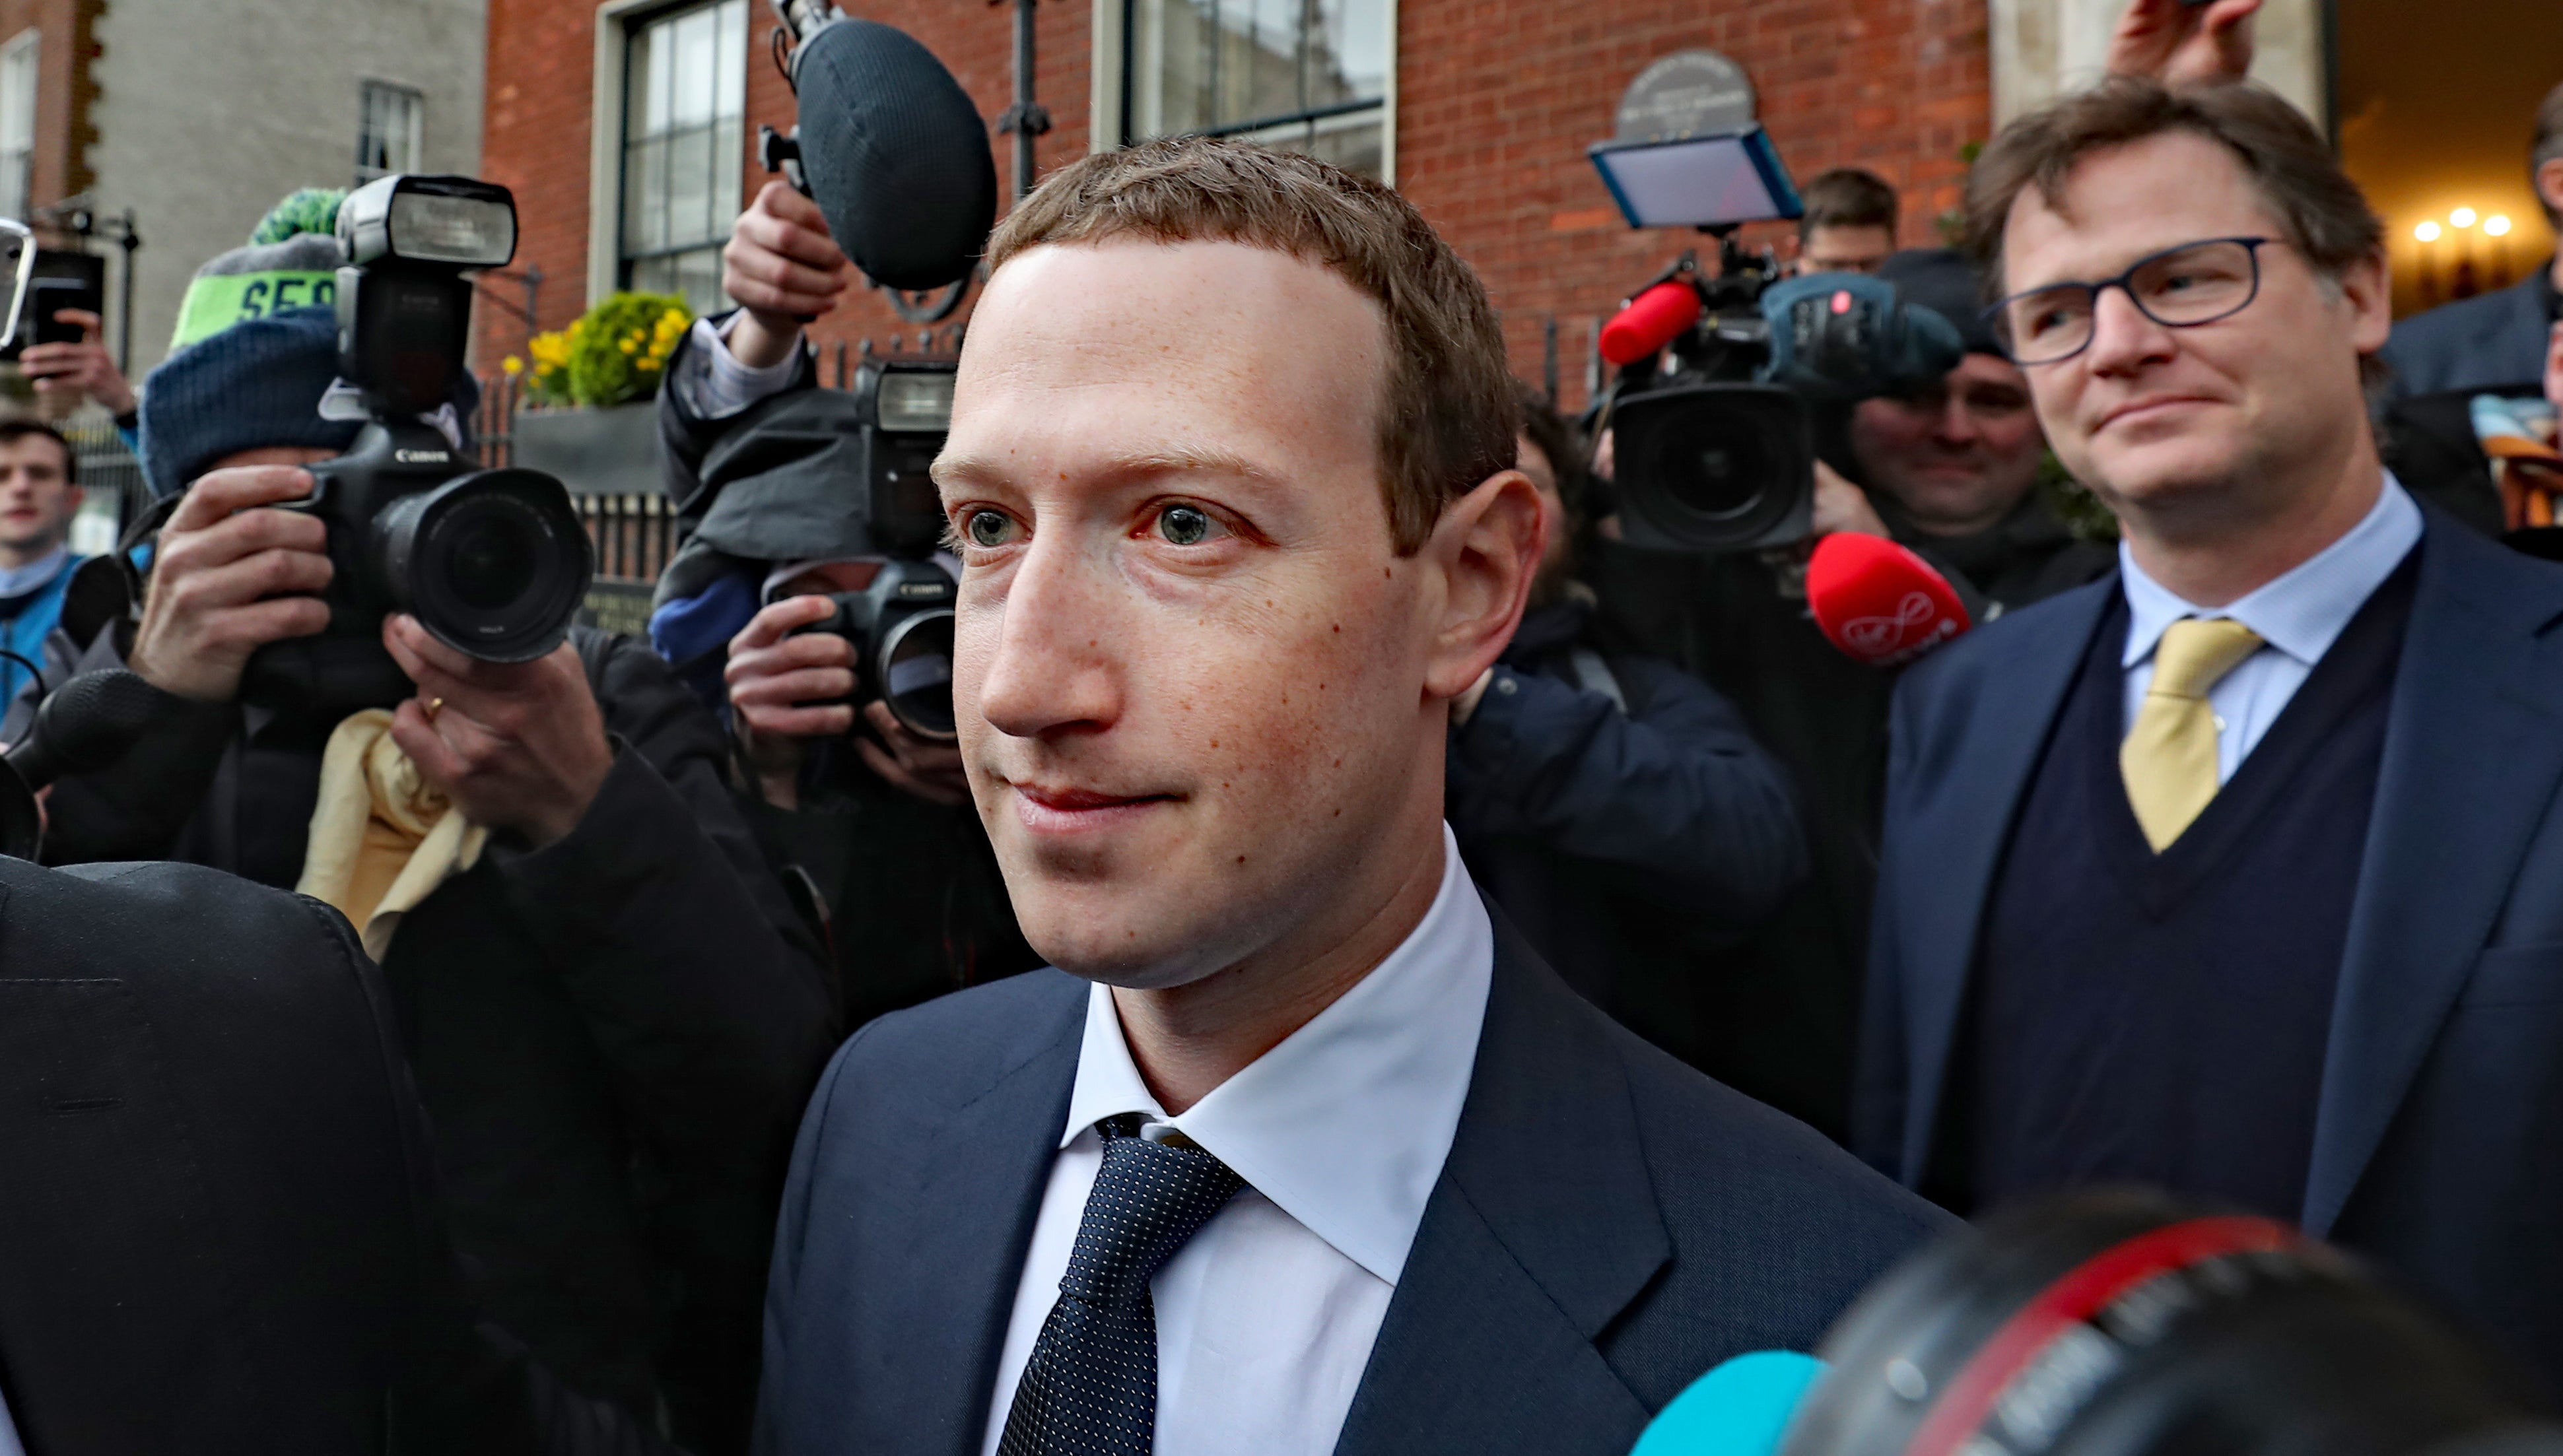 Sir Nick Cleggwith Meta Platforms CEO Mark Zuckerberg in Dublin after a meeting with politicians to discuss regulation of social media and harmful content (Niall Carson/PA)